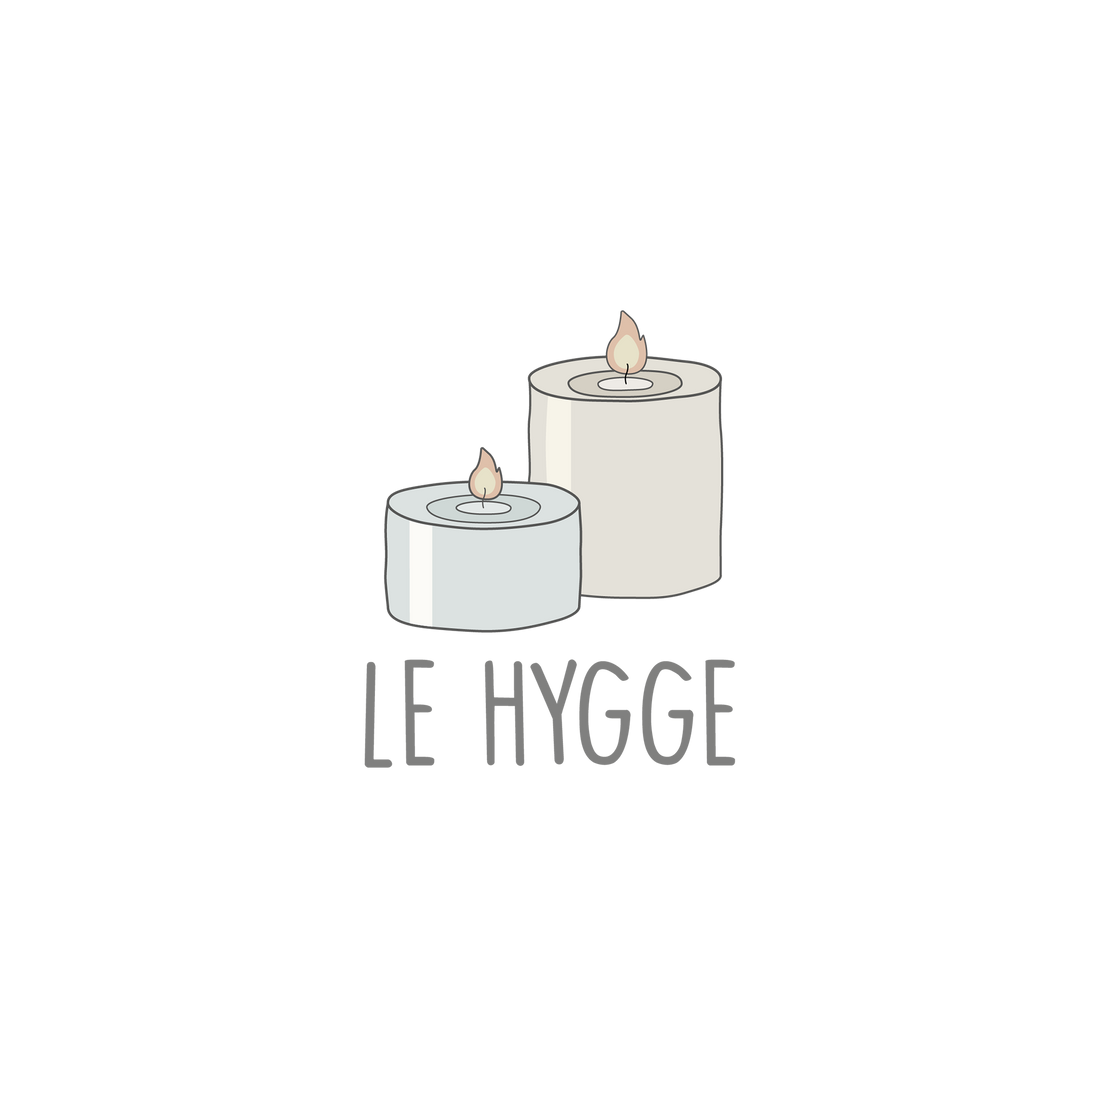 The hygge